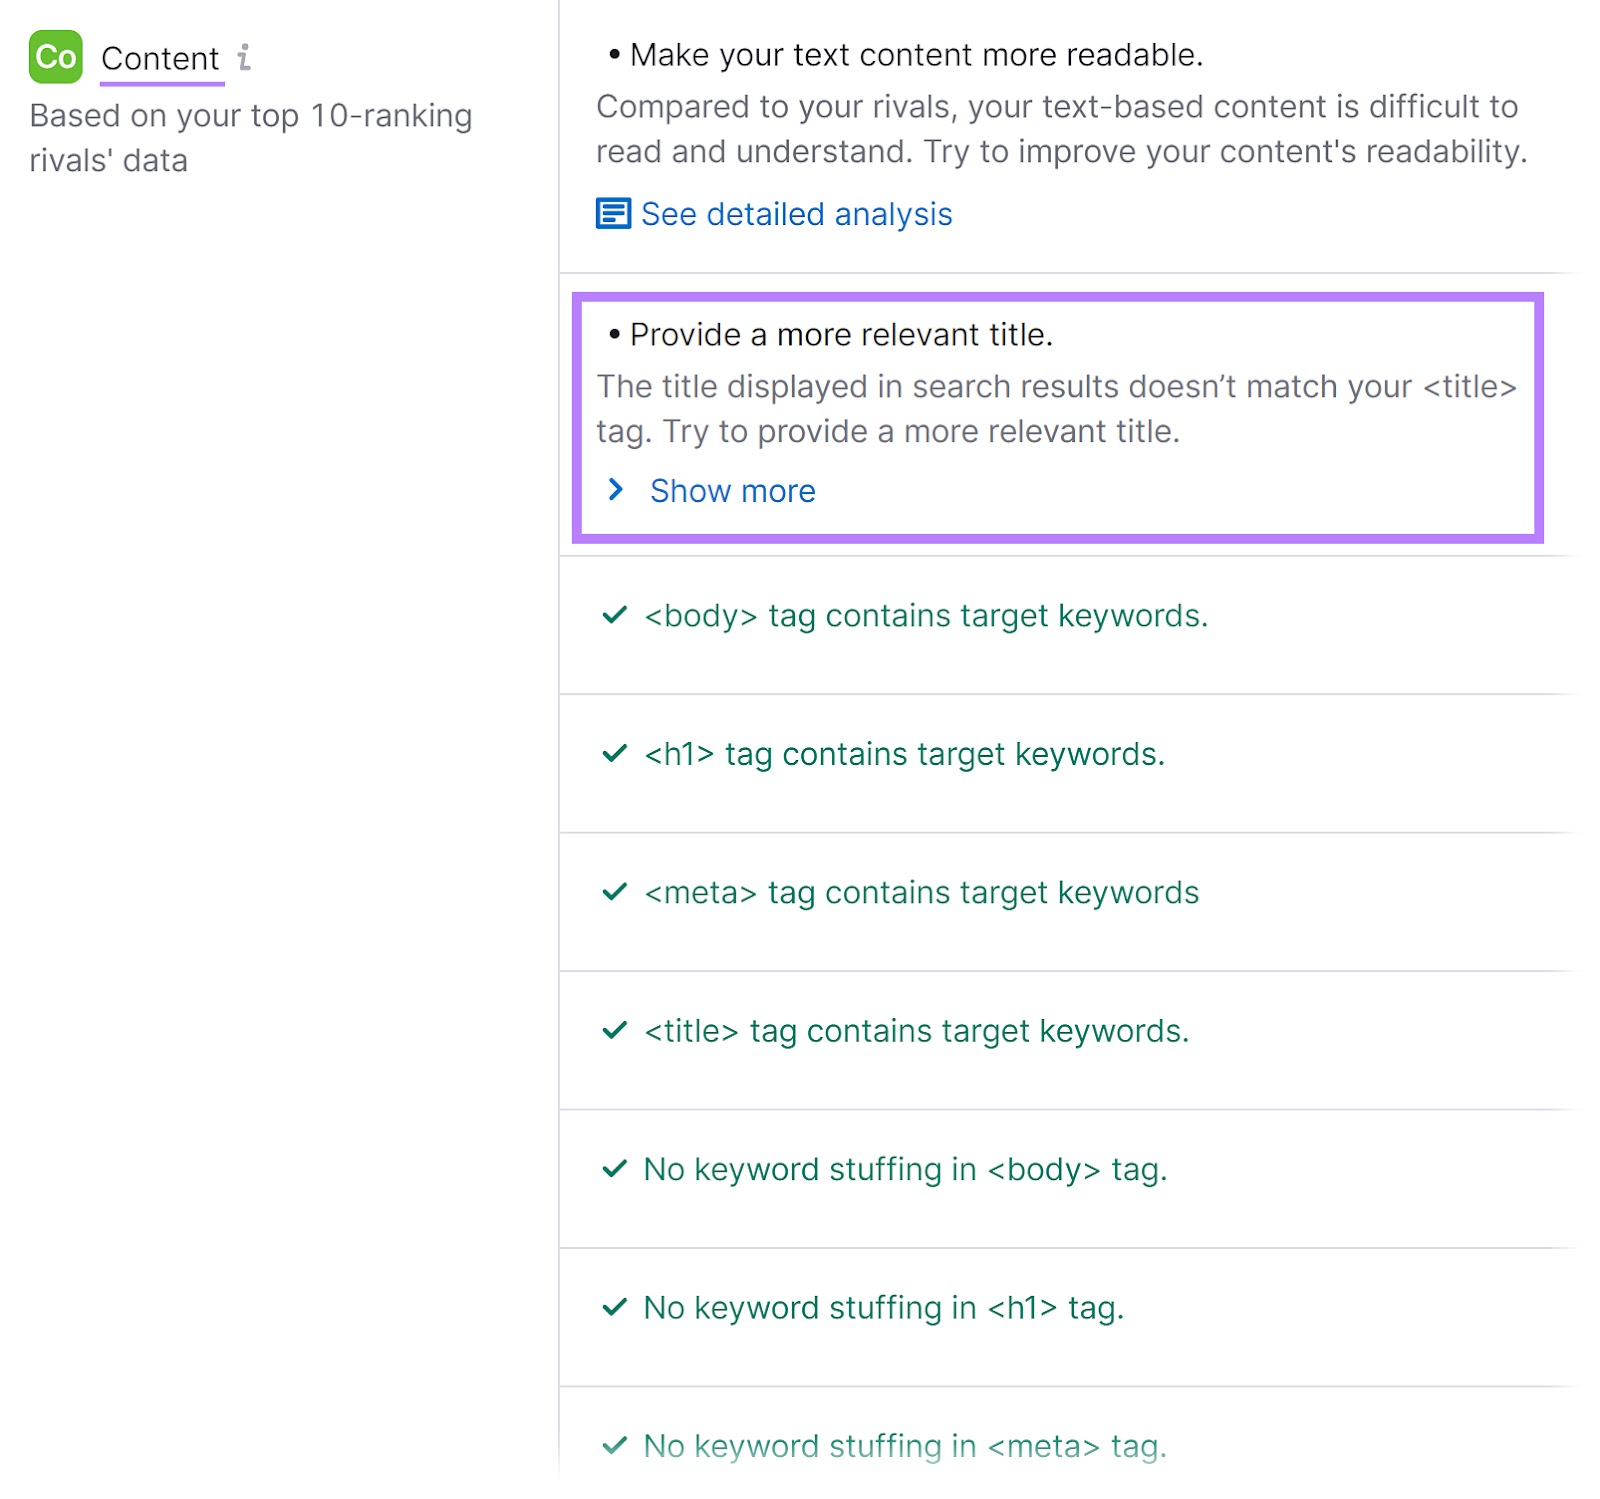 “Content” section of the On Page SEO Checker tool with the “Provide a more relevant title” recommendation highlighted.